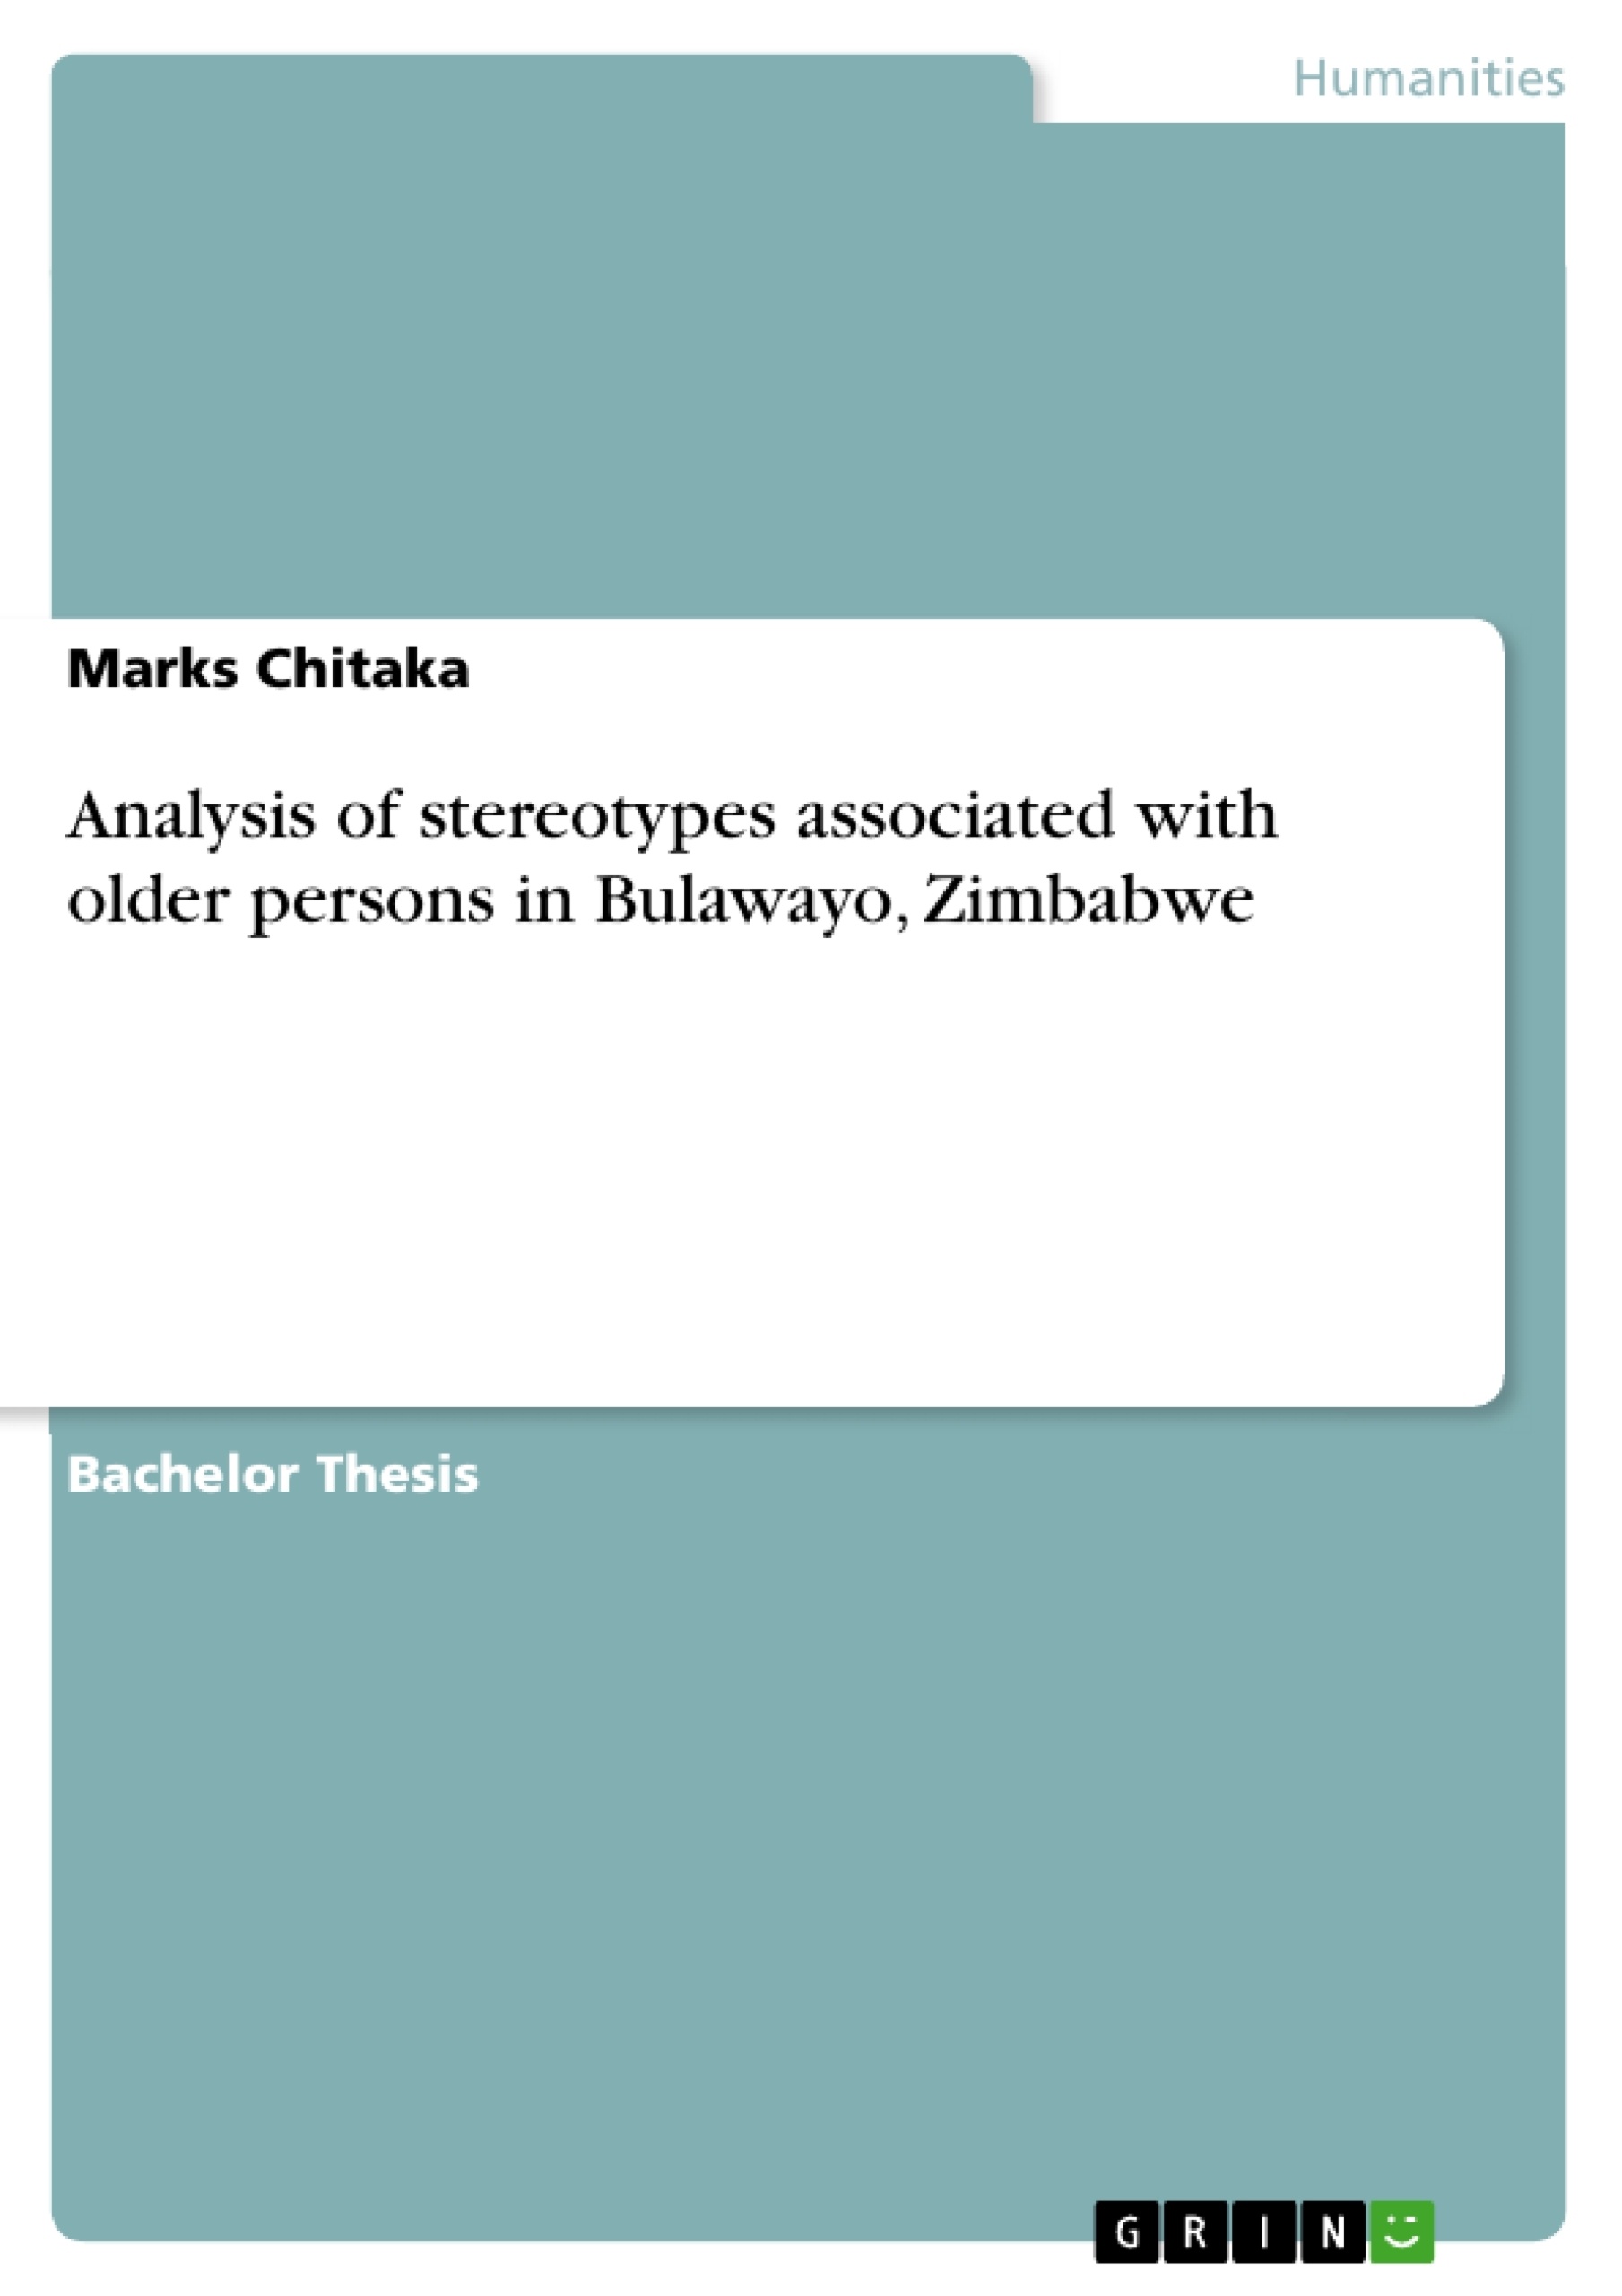 Title: Analysis of stereotypes associated with older persons in Bulawayo, Zimbabwe